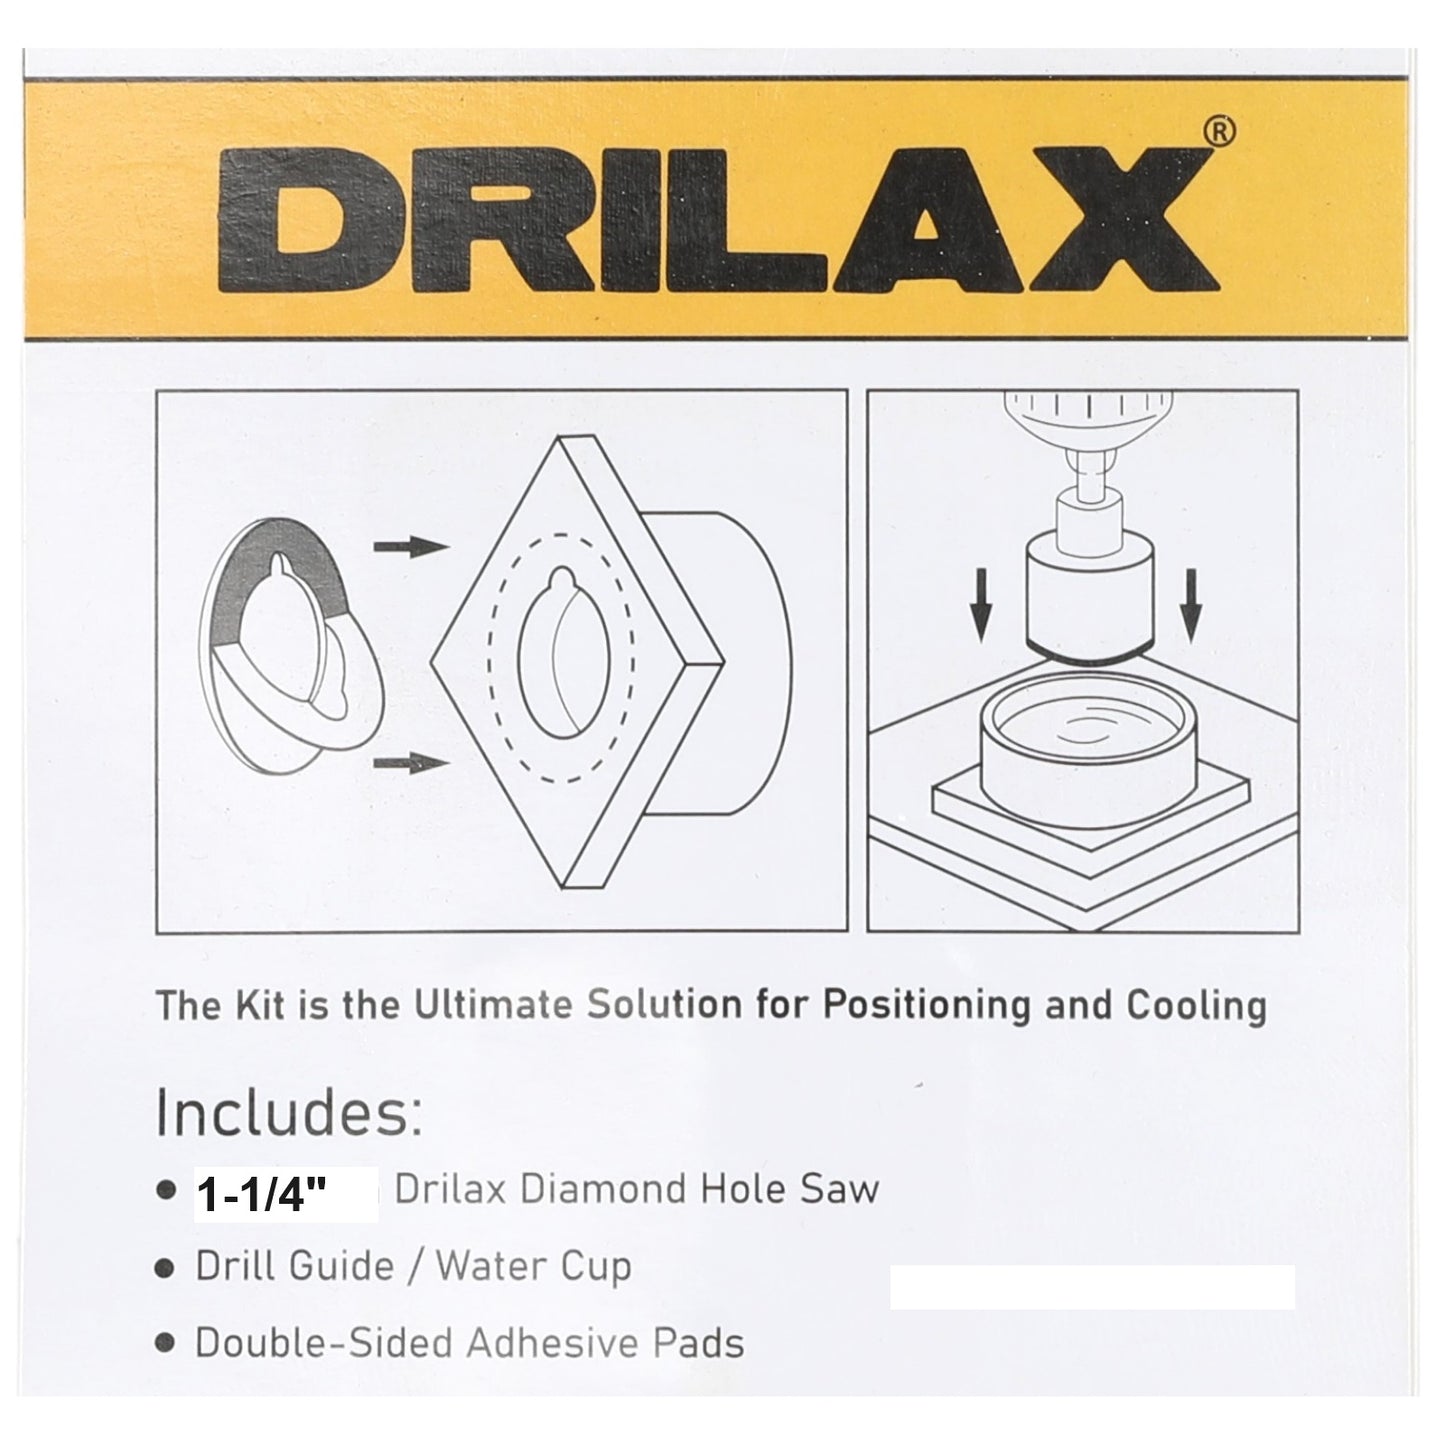 Drilax 1-1/4 inch Diamond Hole Saw with Water Delivery System Guide for Quartz, Granite, Marble, Porcelain, Ceramic, Glass Tiles